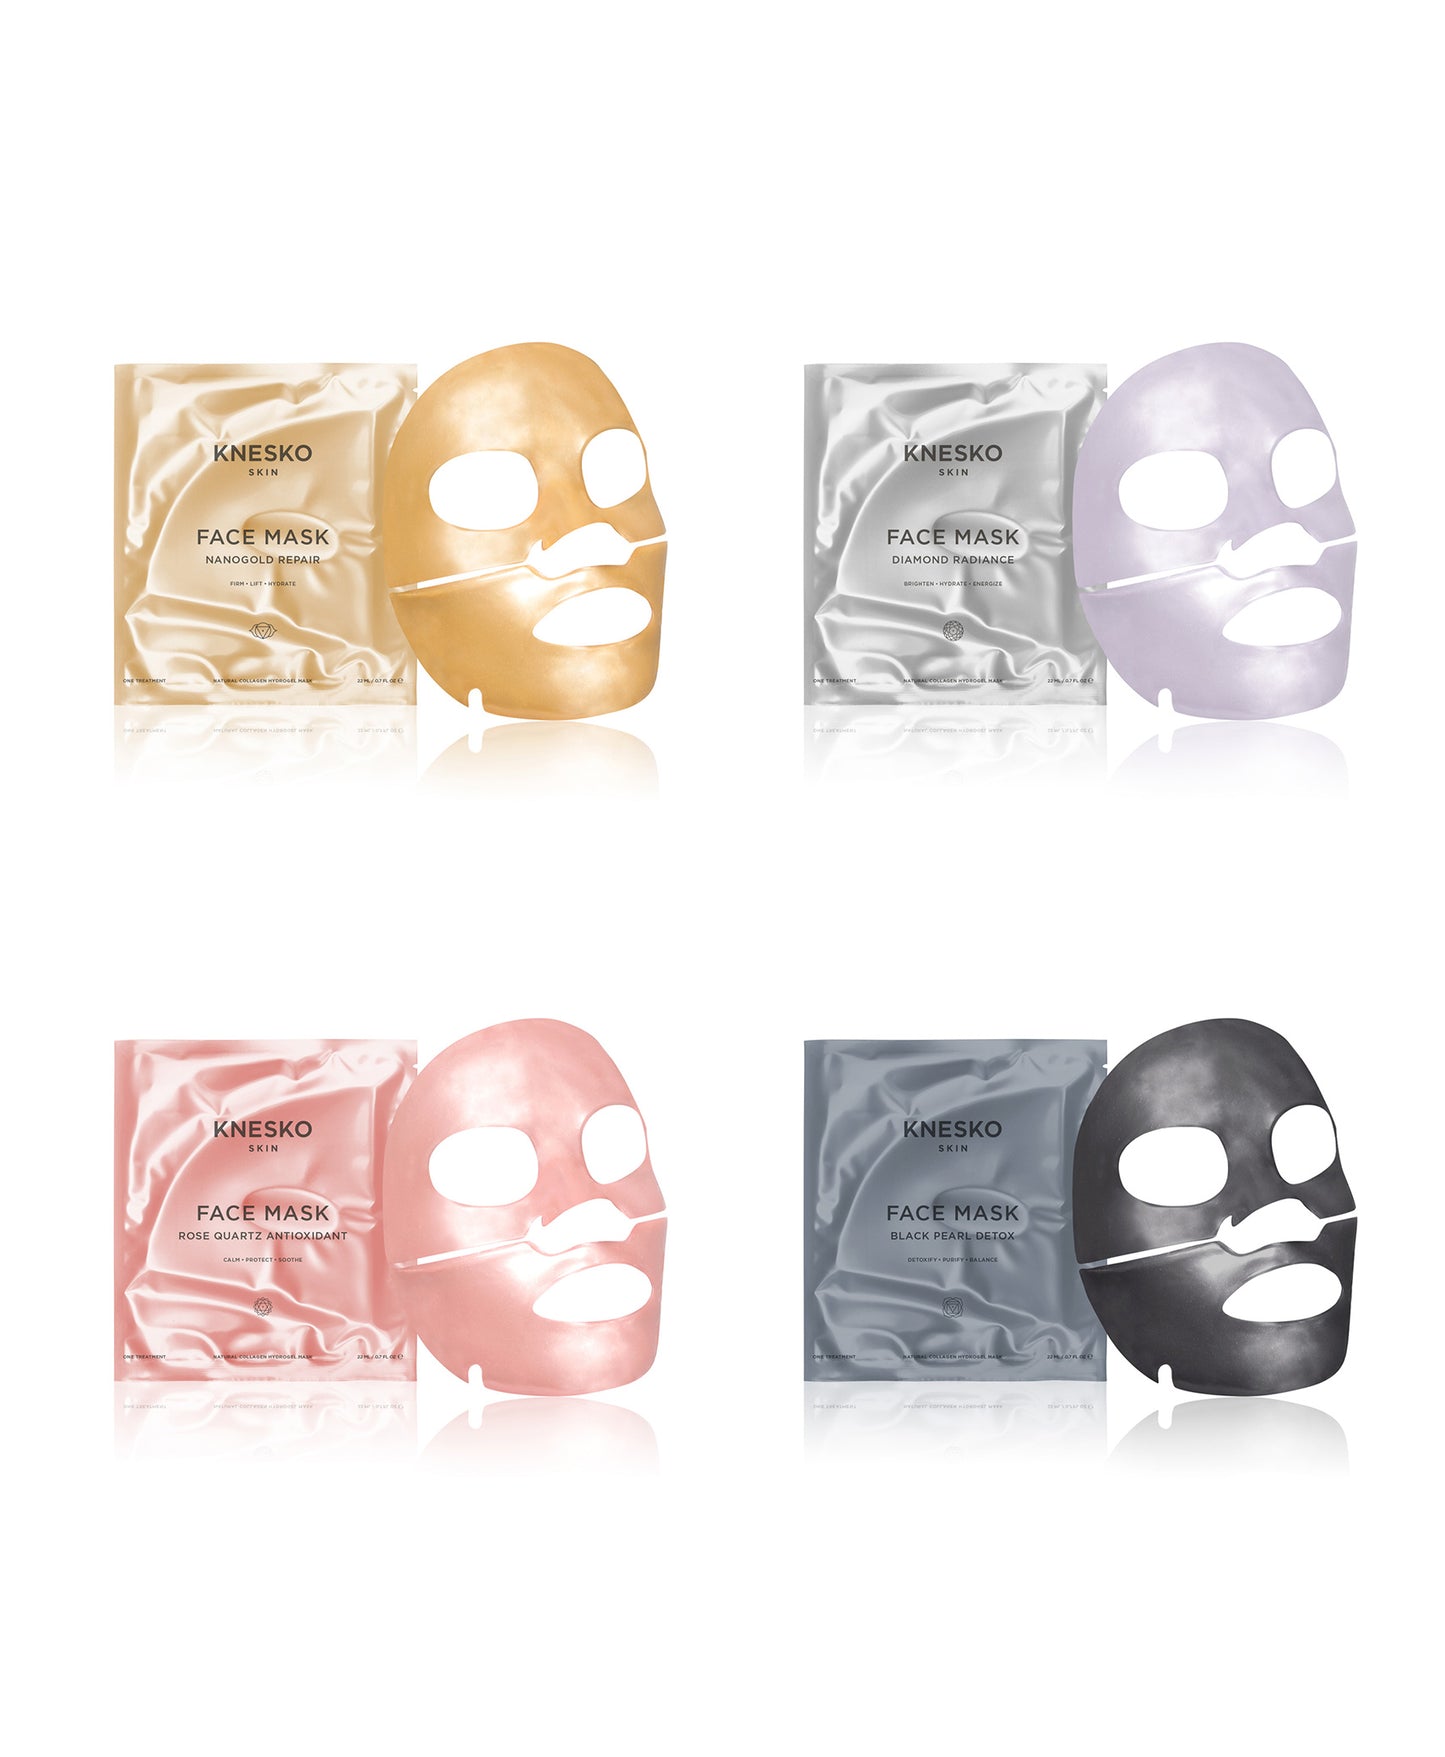 The Luxe Mask Face Kit included face masks.